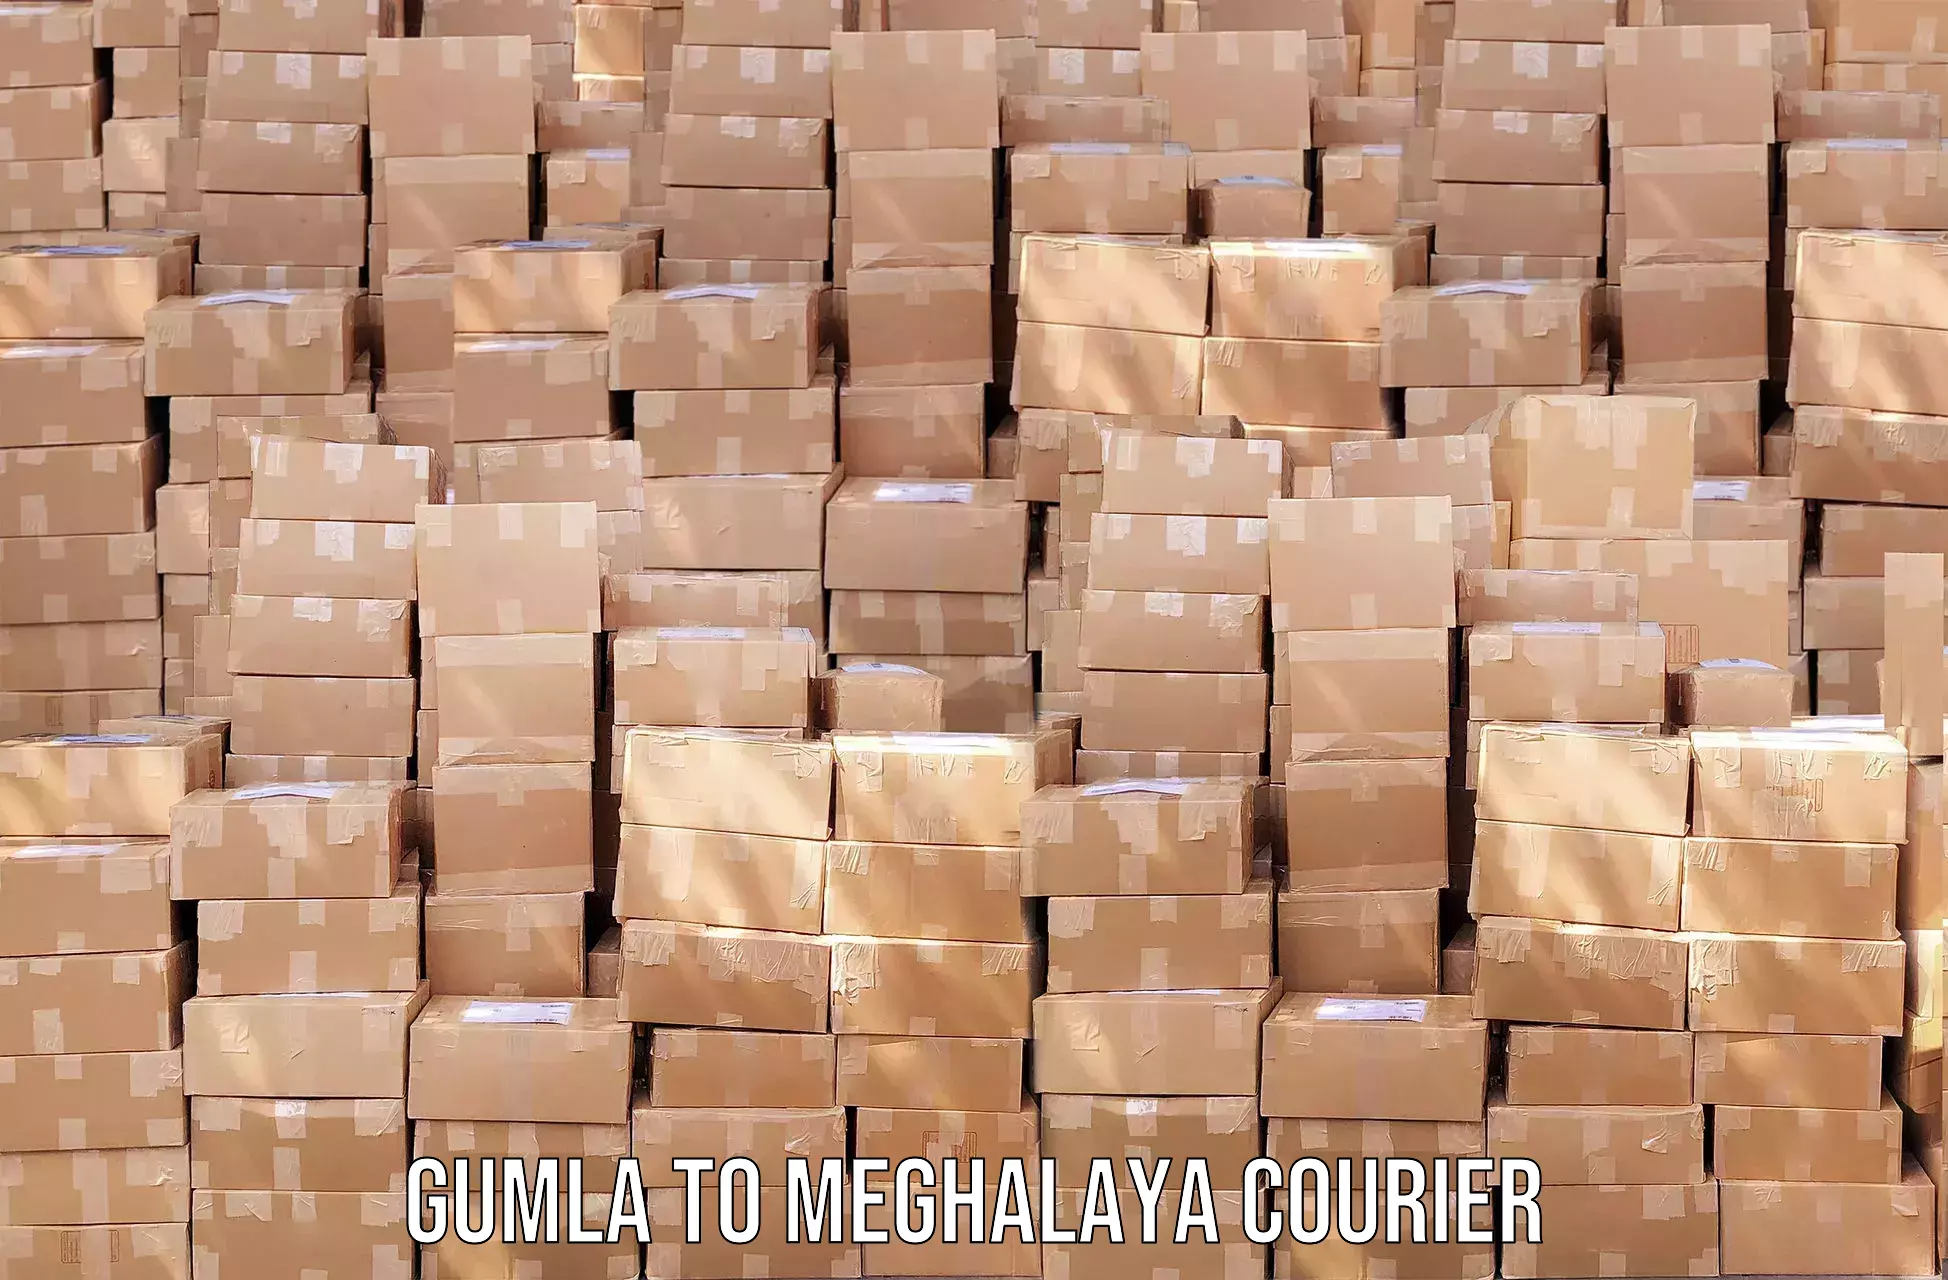 Cash on delivery service Gumla to Shillong